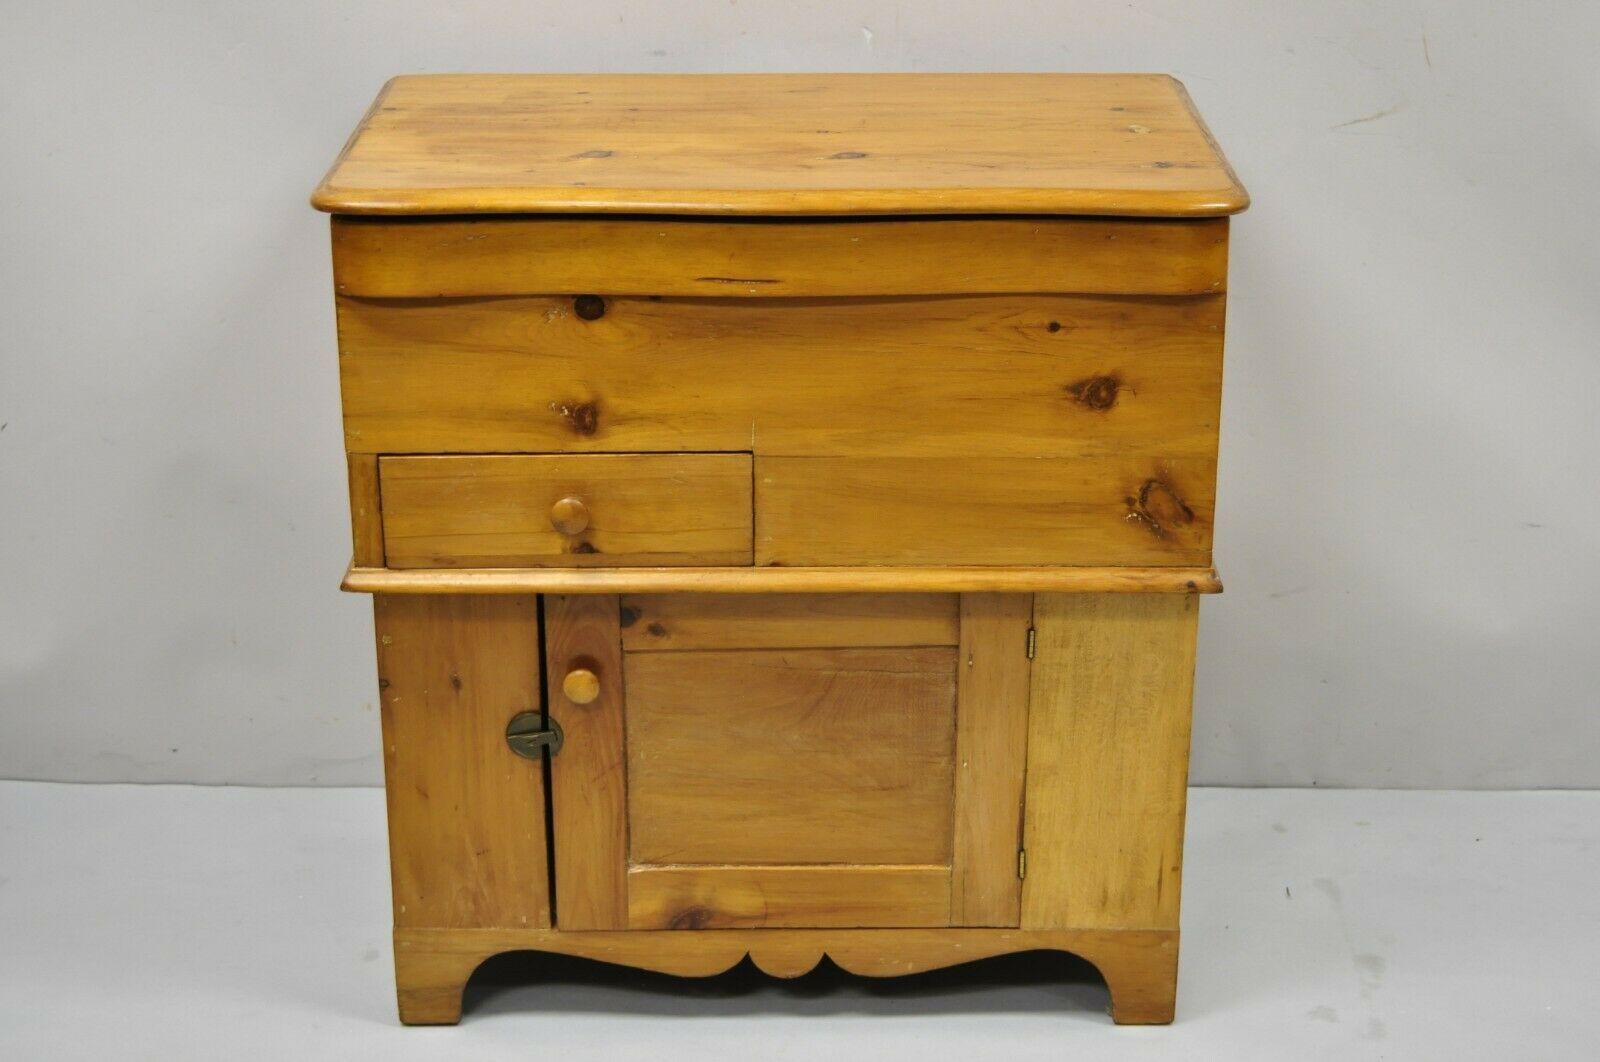 Antique 19th C. Primitive Pine wood lift top dry sink washstand commode cabinet. Item features serpentine lift top lid, solid pine wood frame, beautiful wood grain, distressed finish, 1 swing door, 1 dovetailed drawer, very nice antique item,